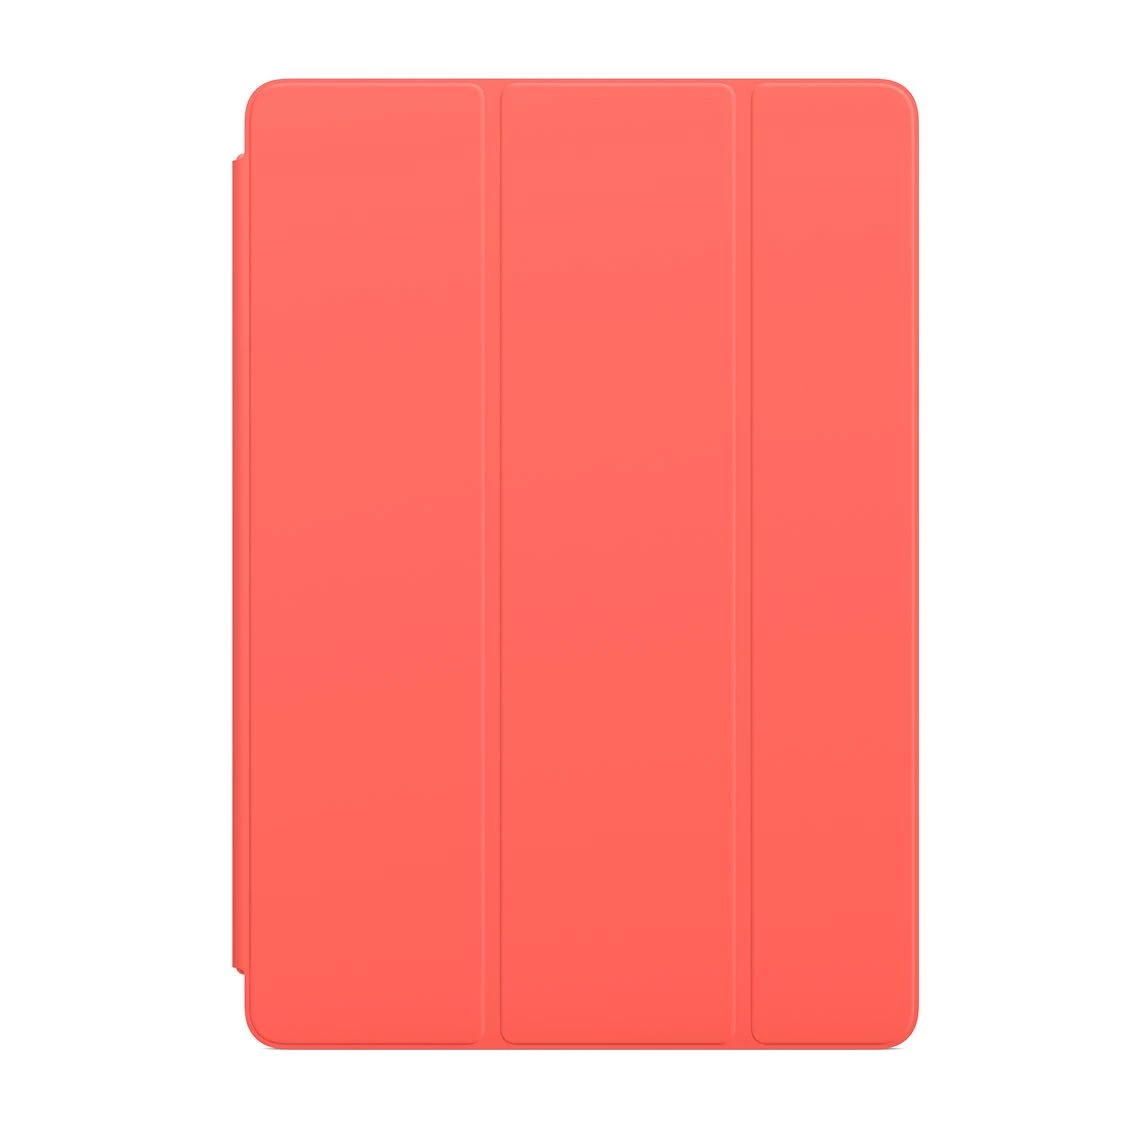 Apple Smart Cover for iPad 10.2" / Air 3 / Pro 10.5" - Pink Citrus (MGYT3)